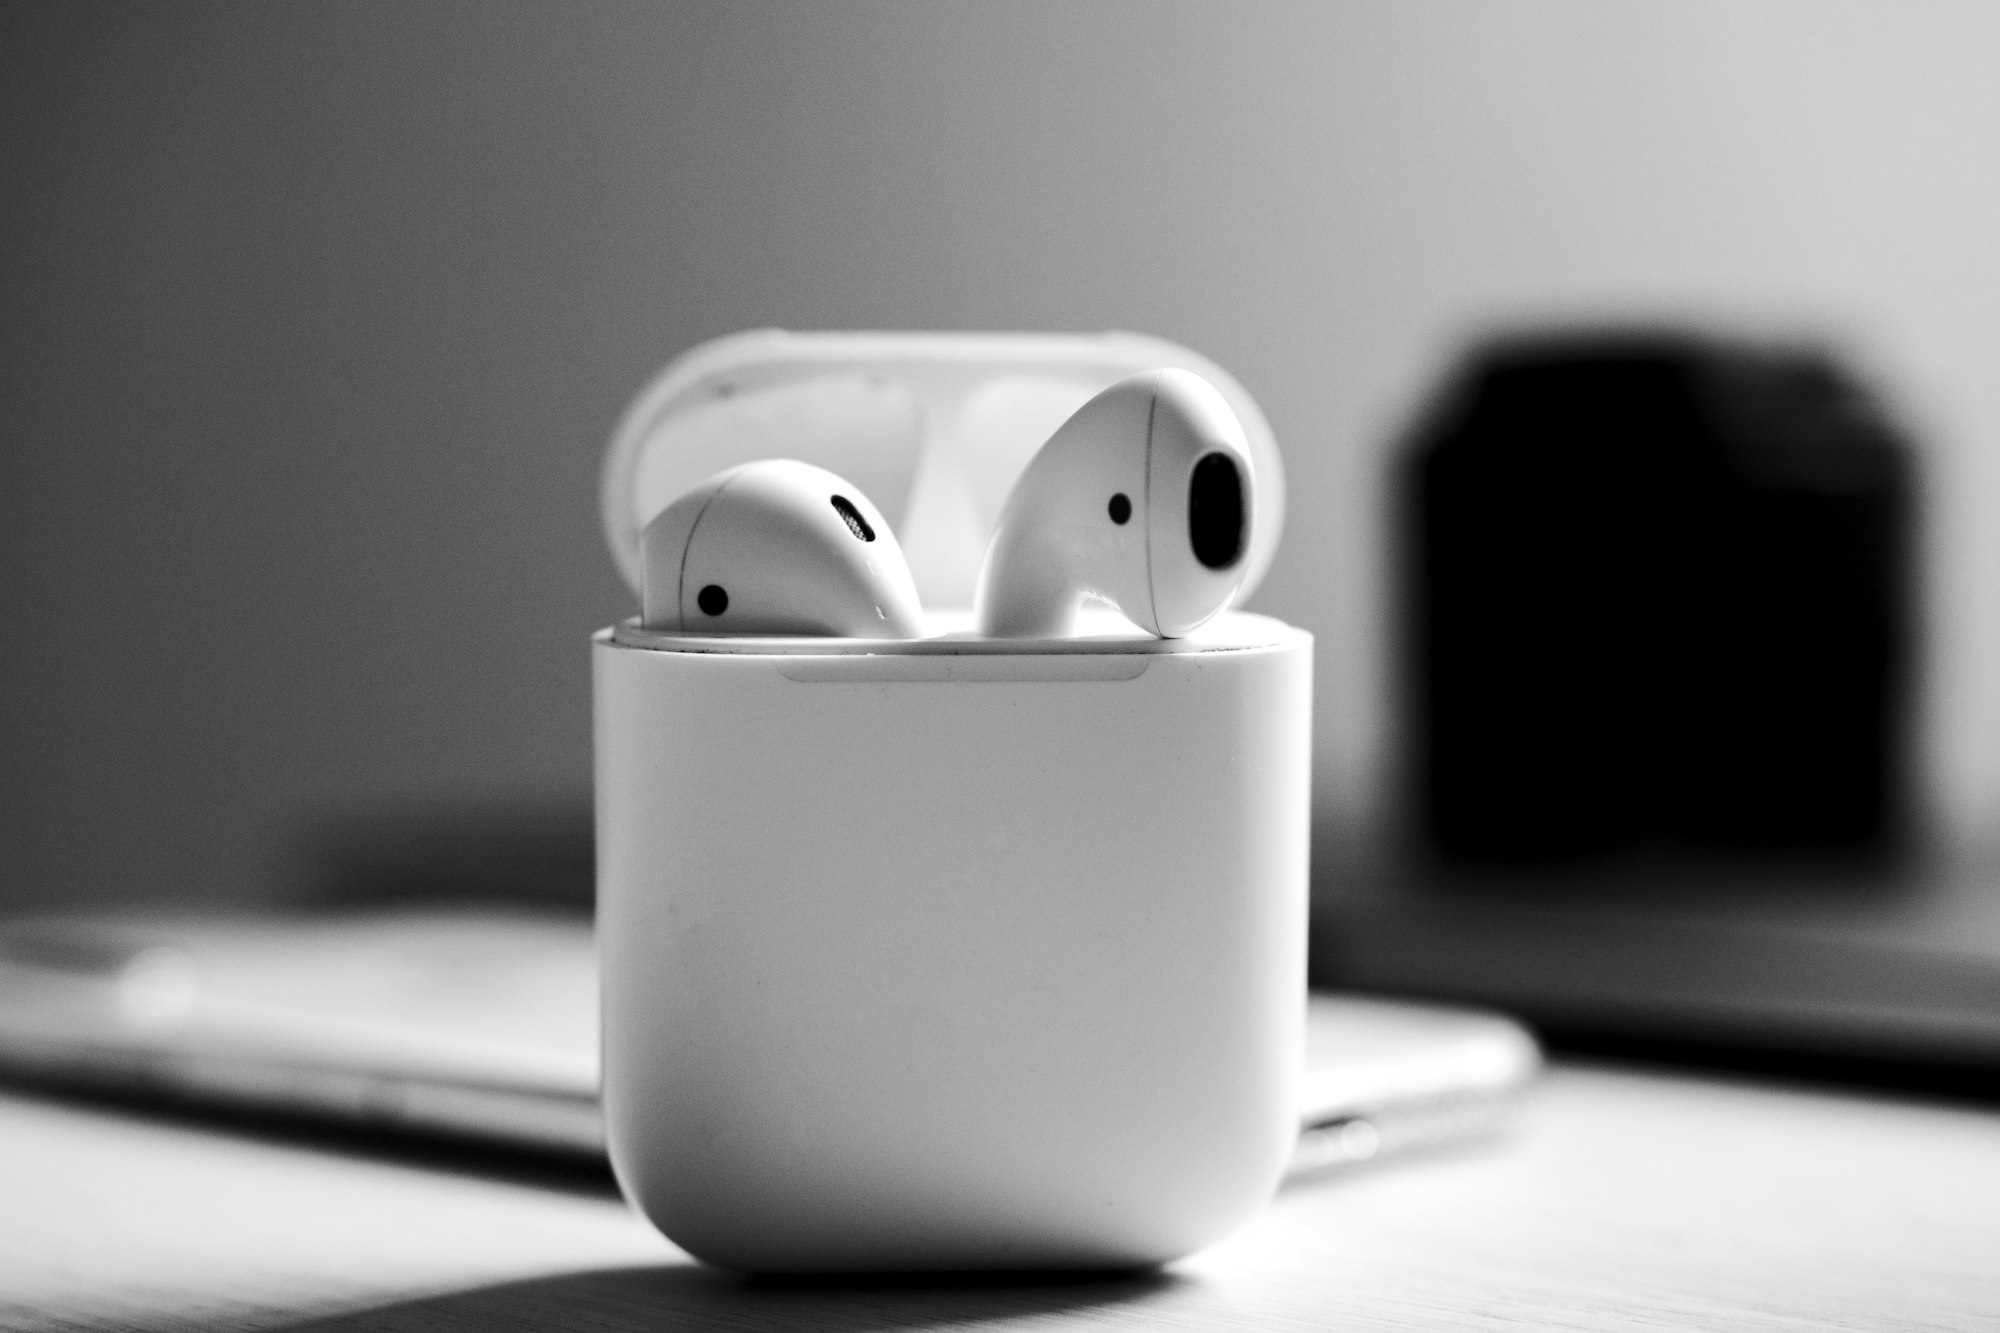 Apple AirPods (Black and White)